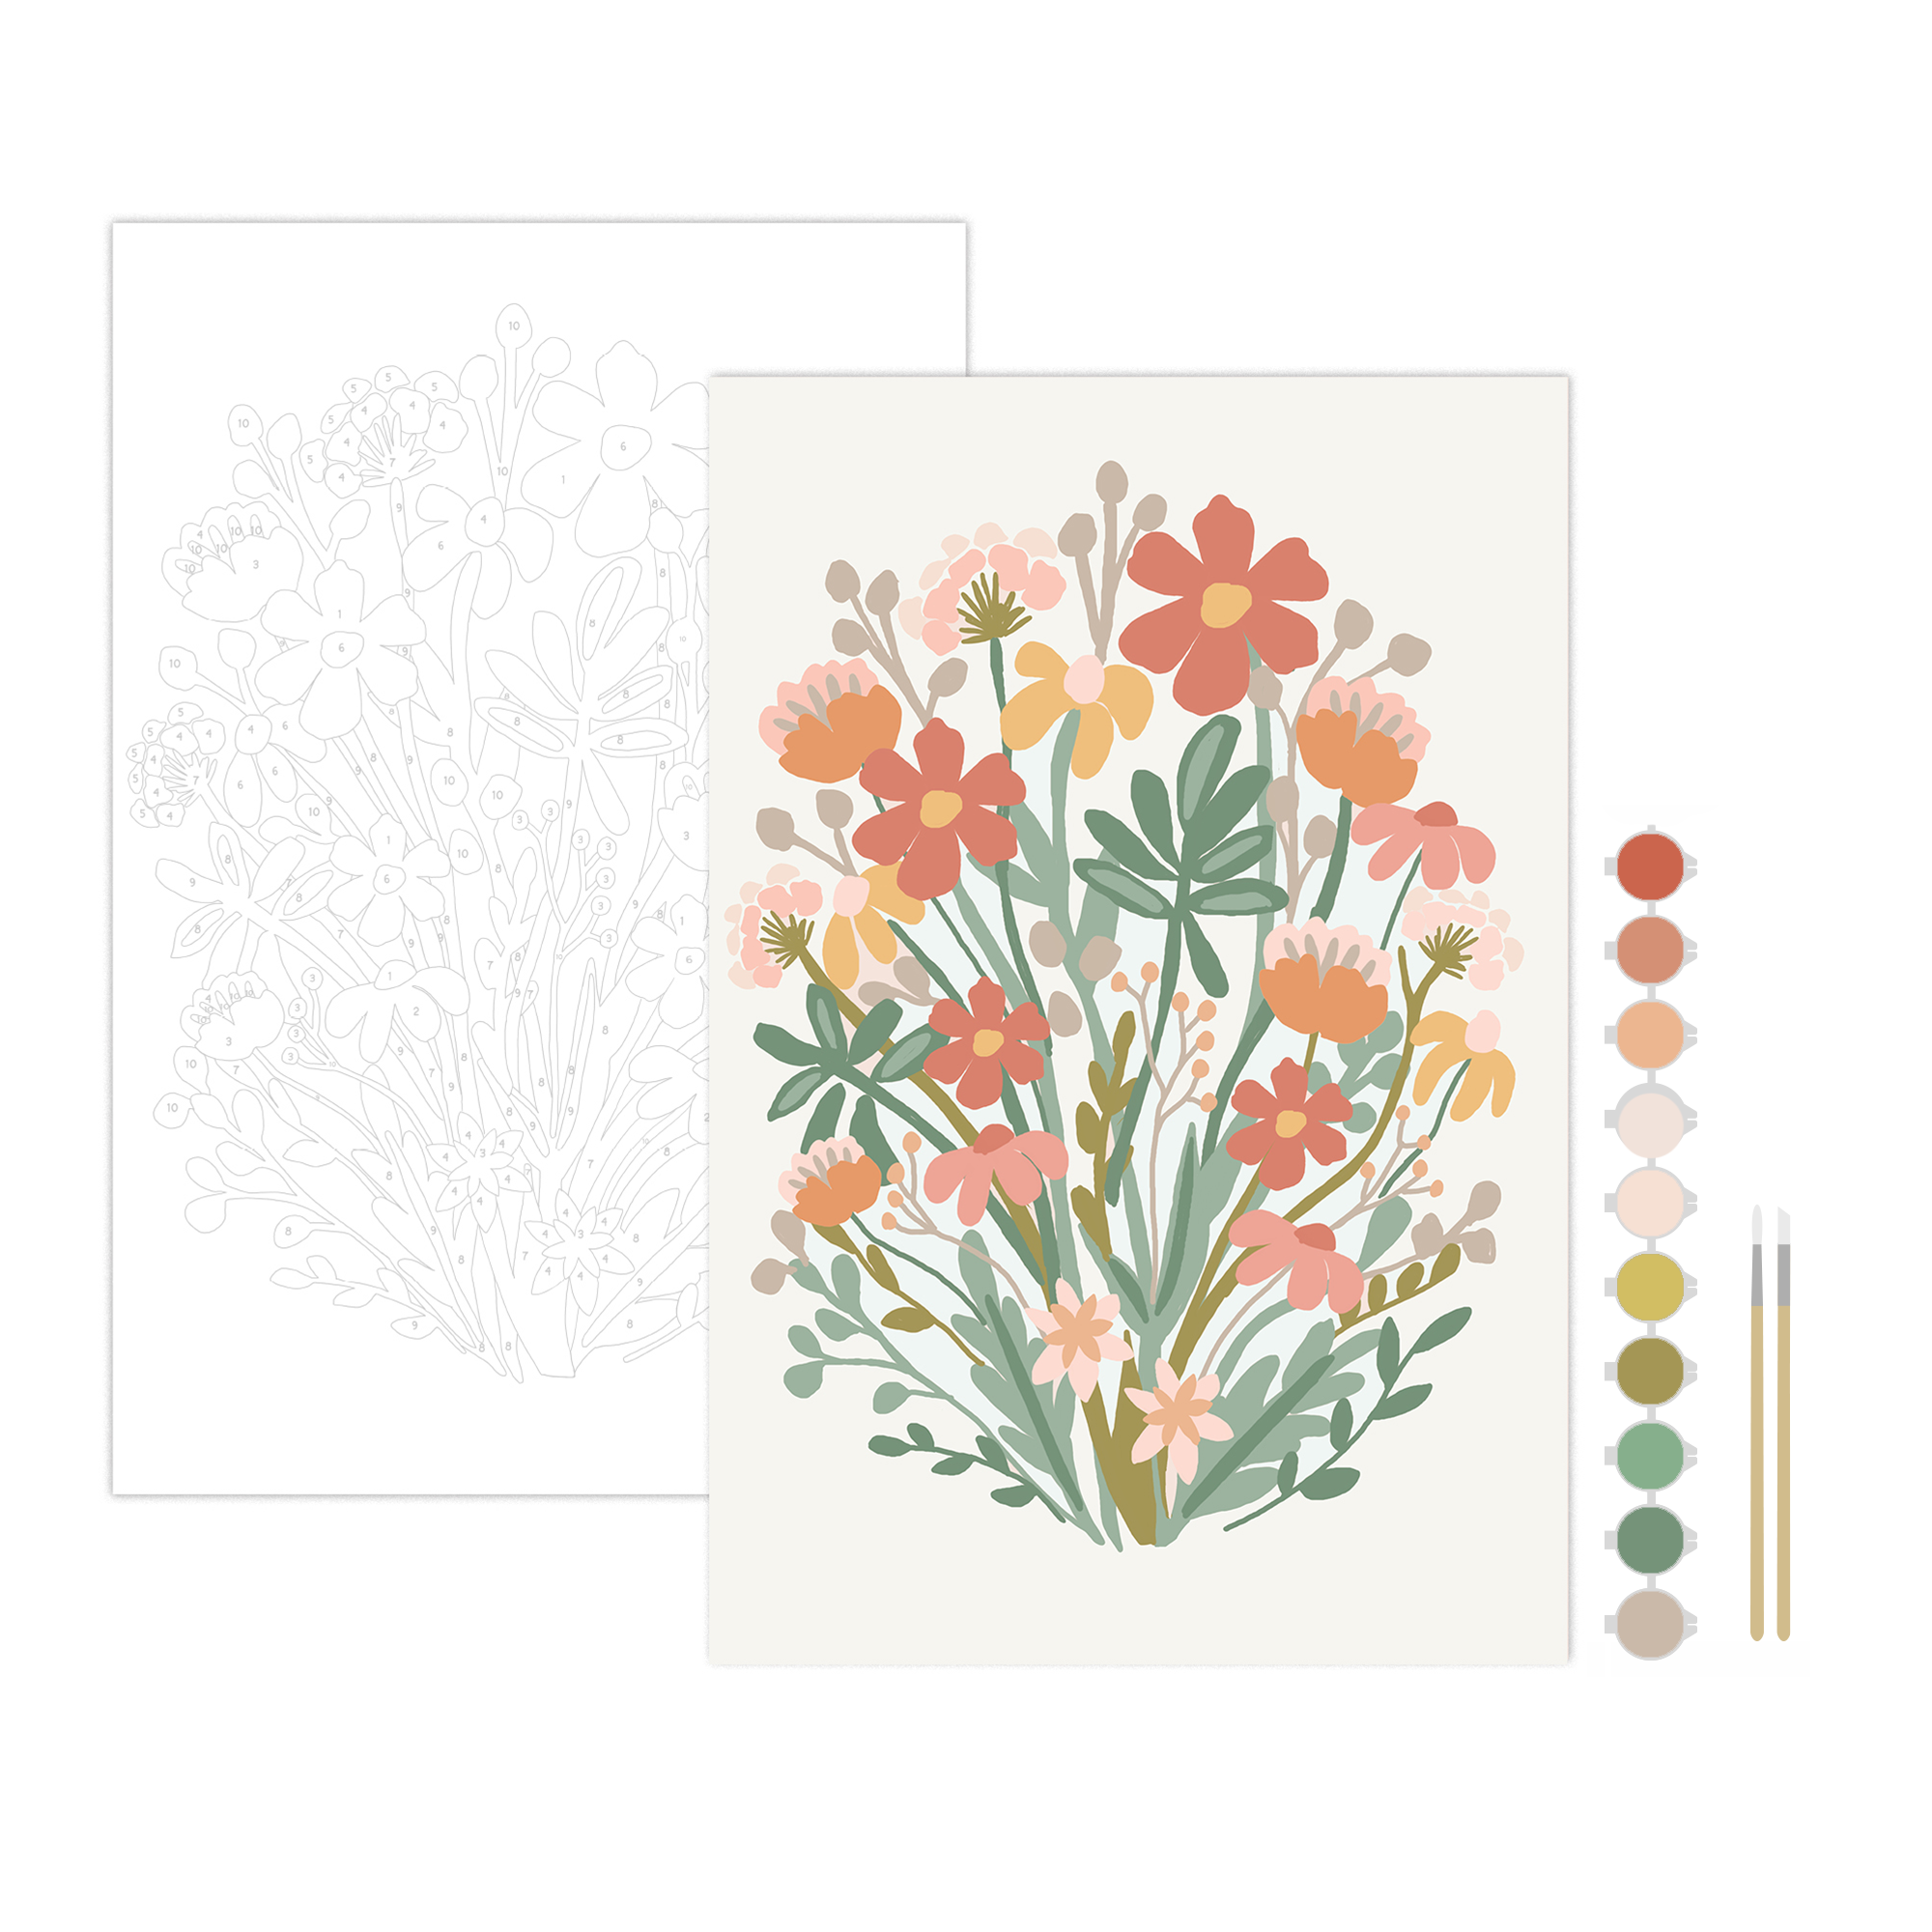 Wildflowers Meditative Art Paint by Number Kit: Paint by Number Kit